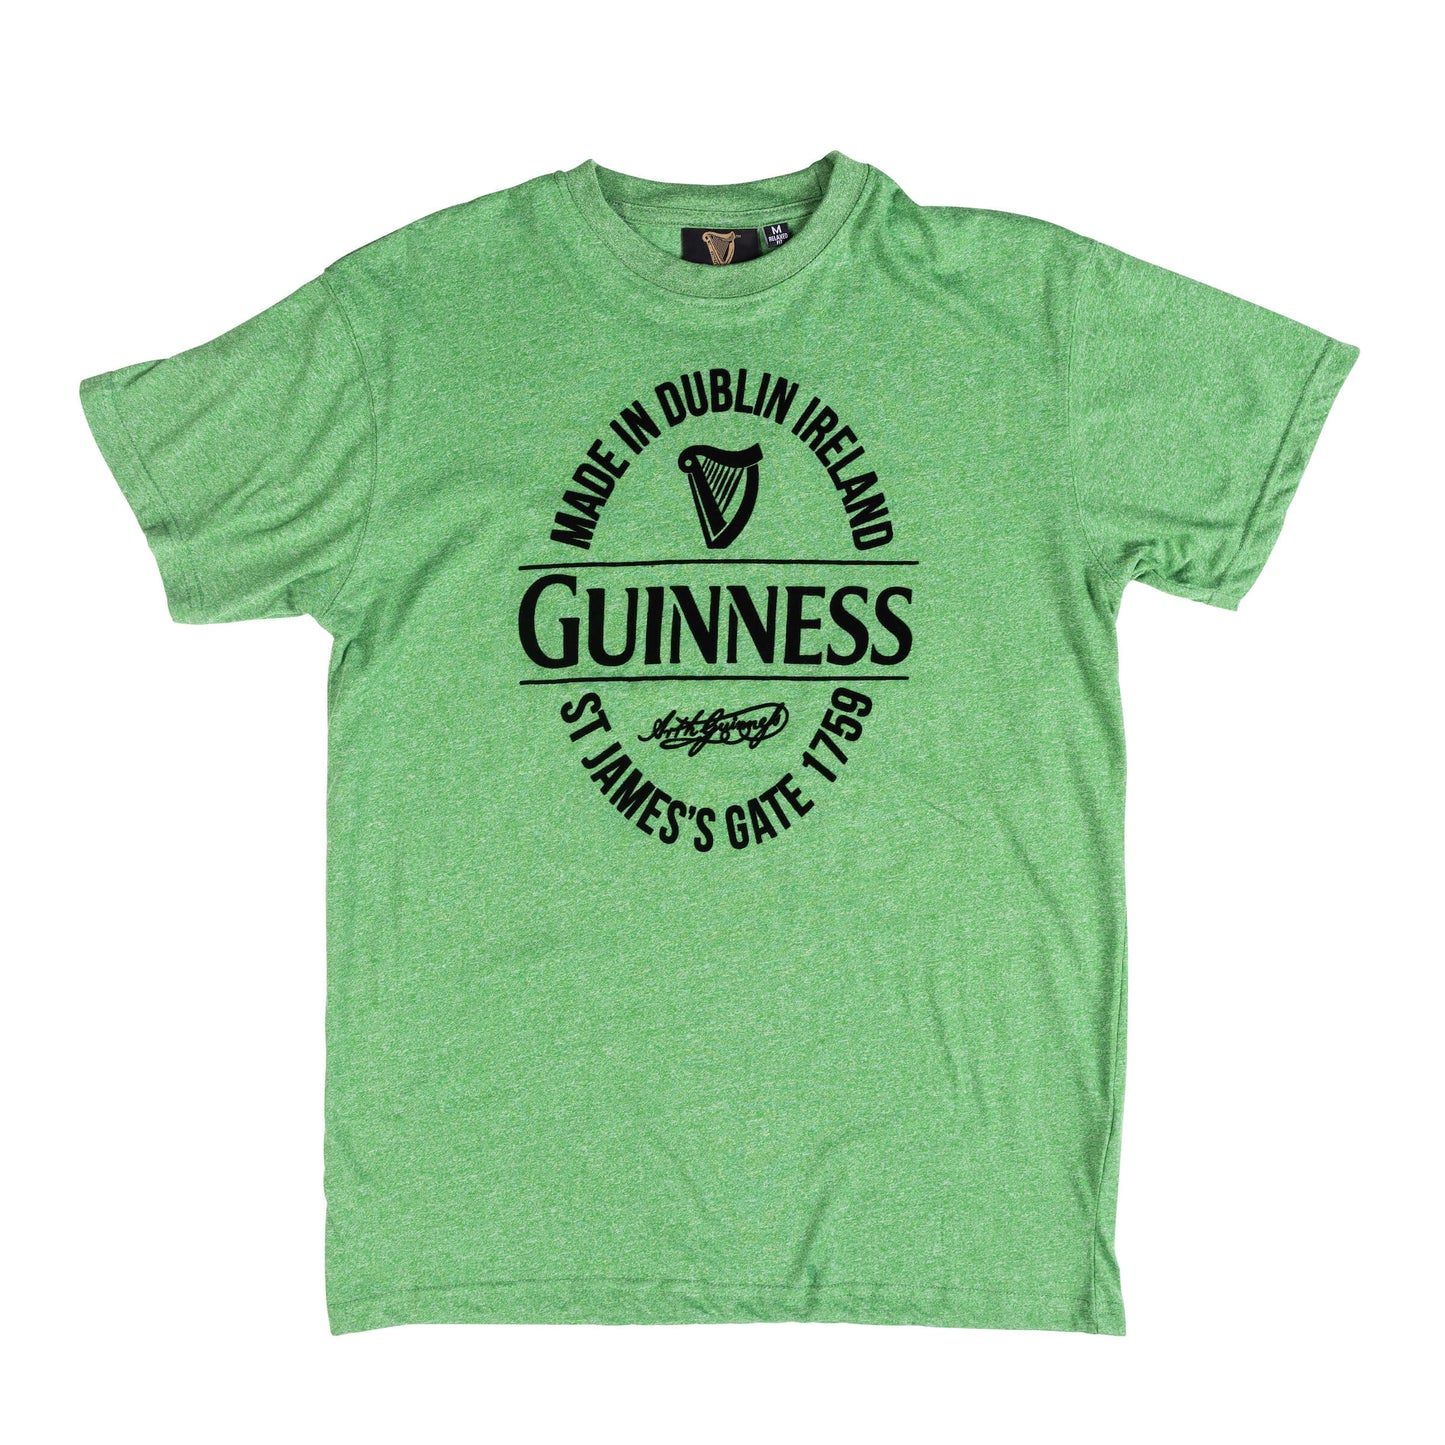 Guinness Storehouse Exclusive St. James's Gate Green T-Shirt